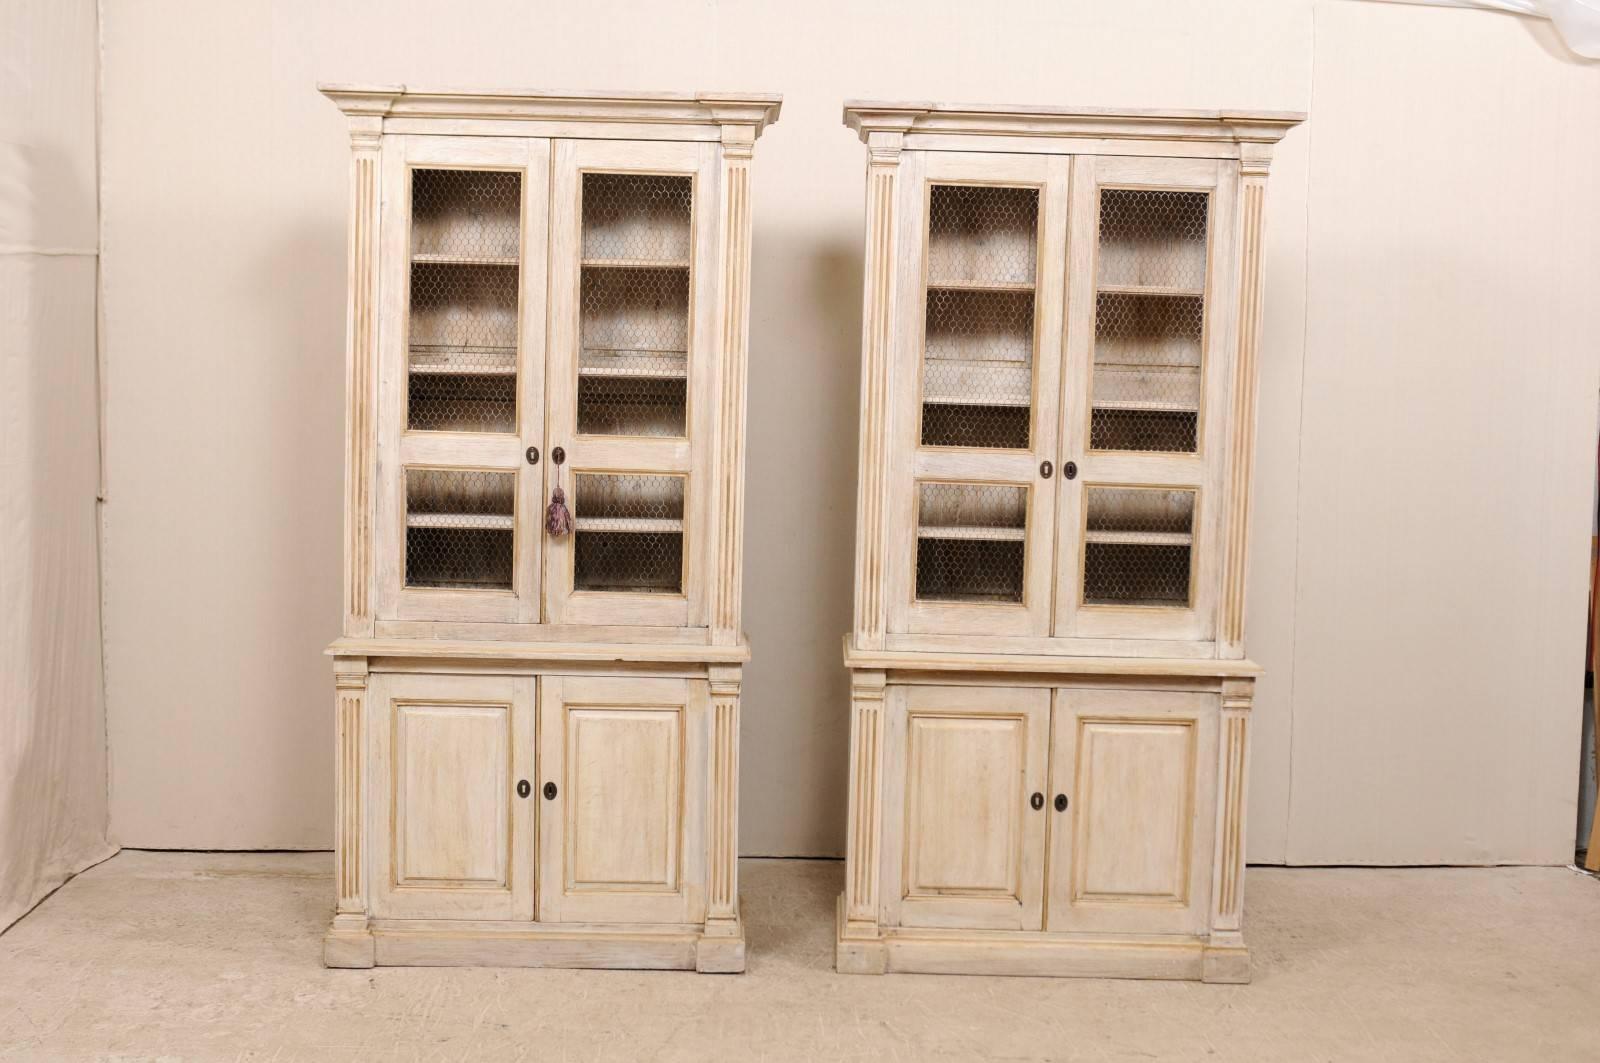 A pair of French 19th century tall cabinets. These antique French buffet à deux-corps (which is the name for a French buffet consisting of an upper and lower case, 